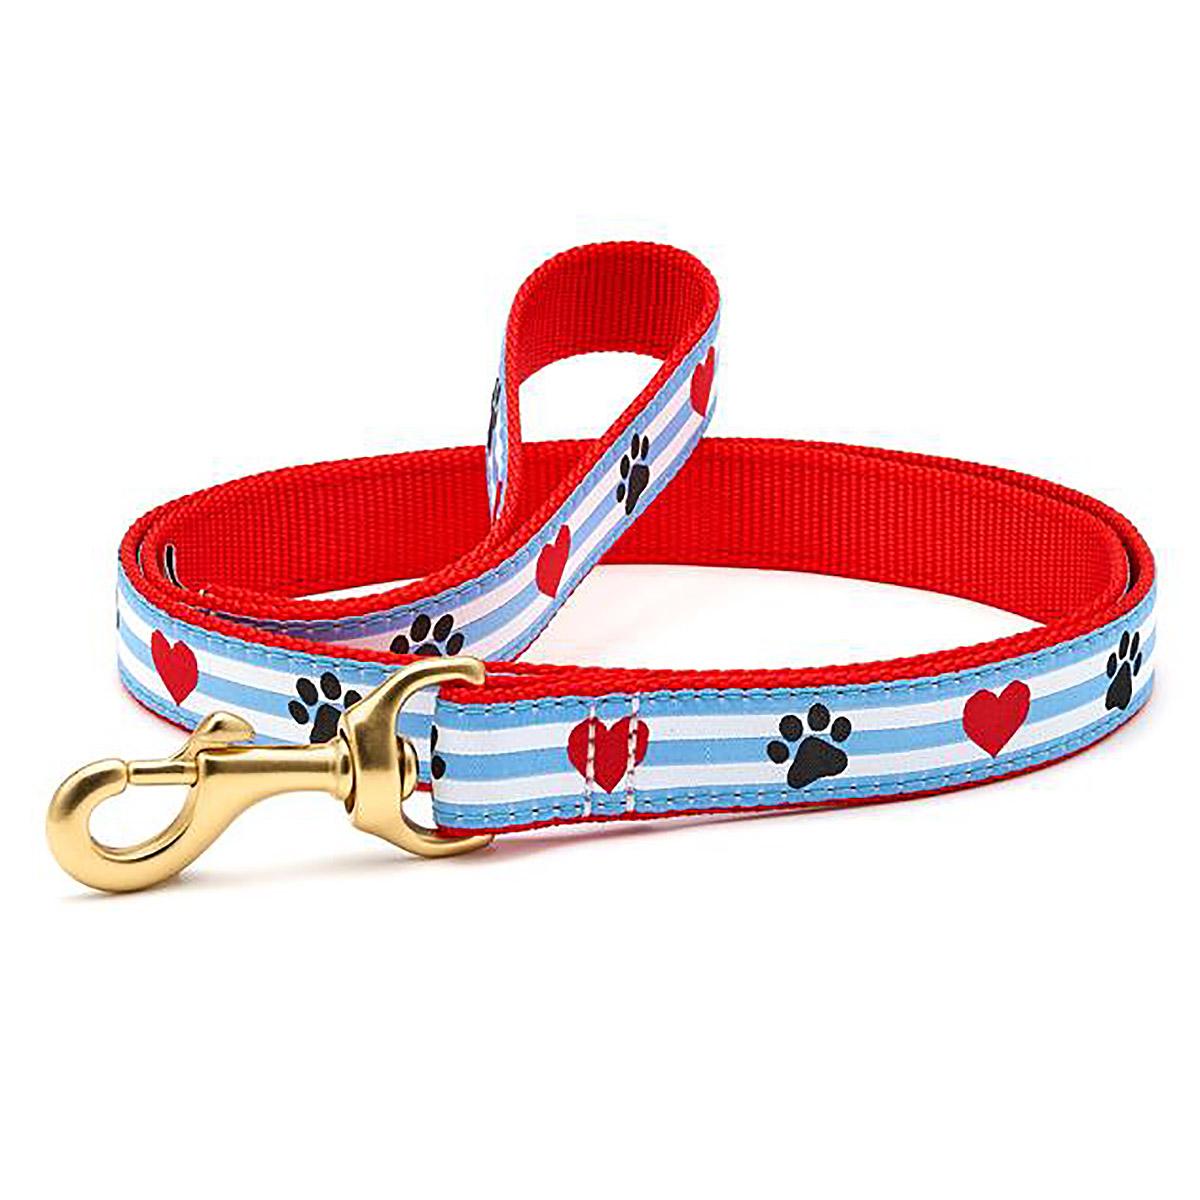 Pawprint Stripe Dog Leash by Up Country